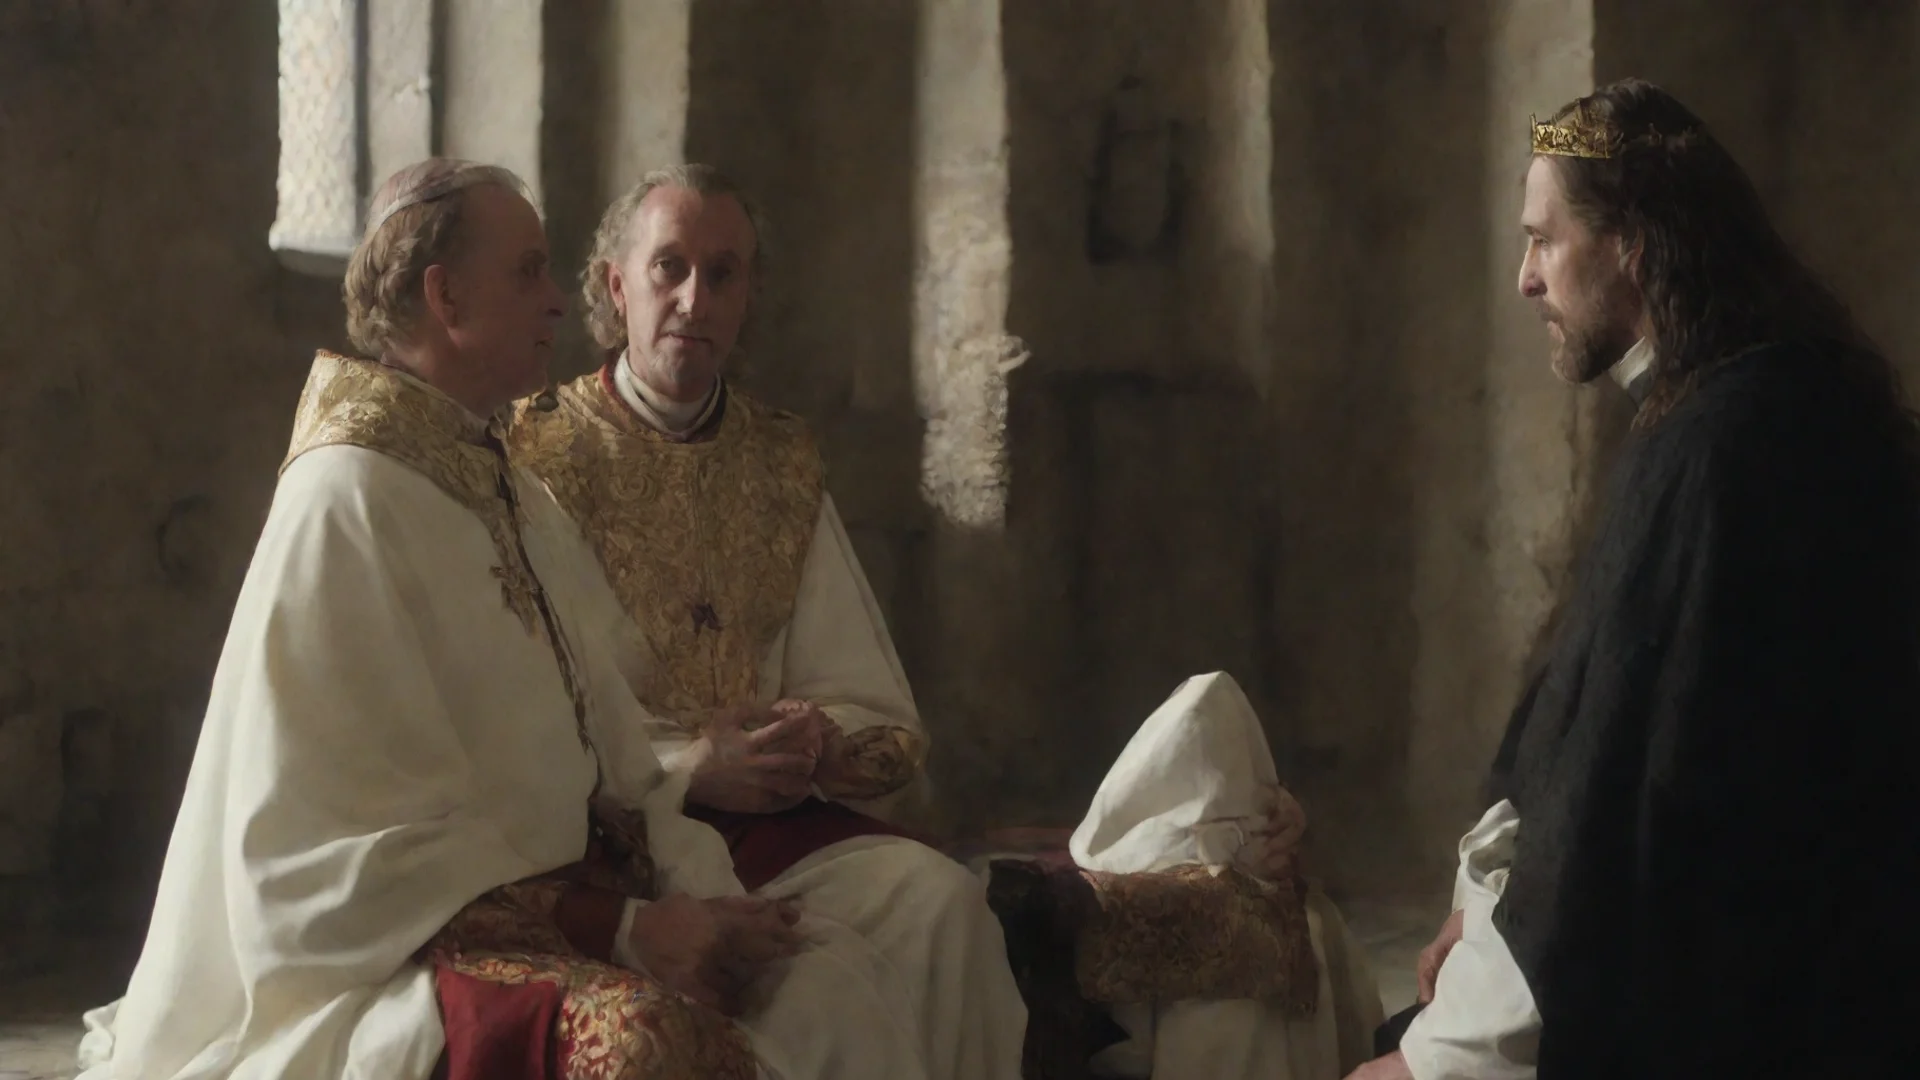 priest and medieval king sit and talk  wide